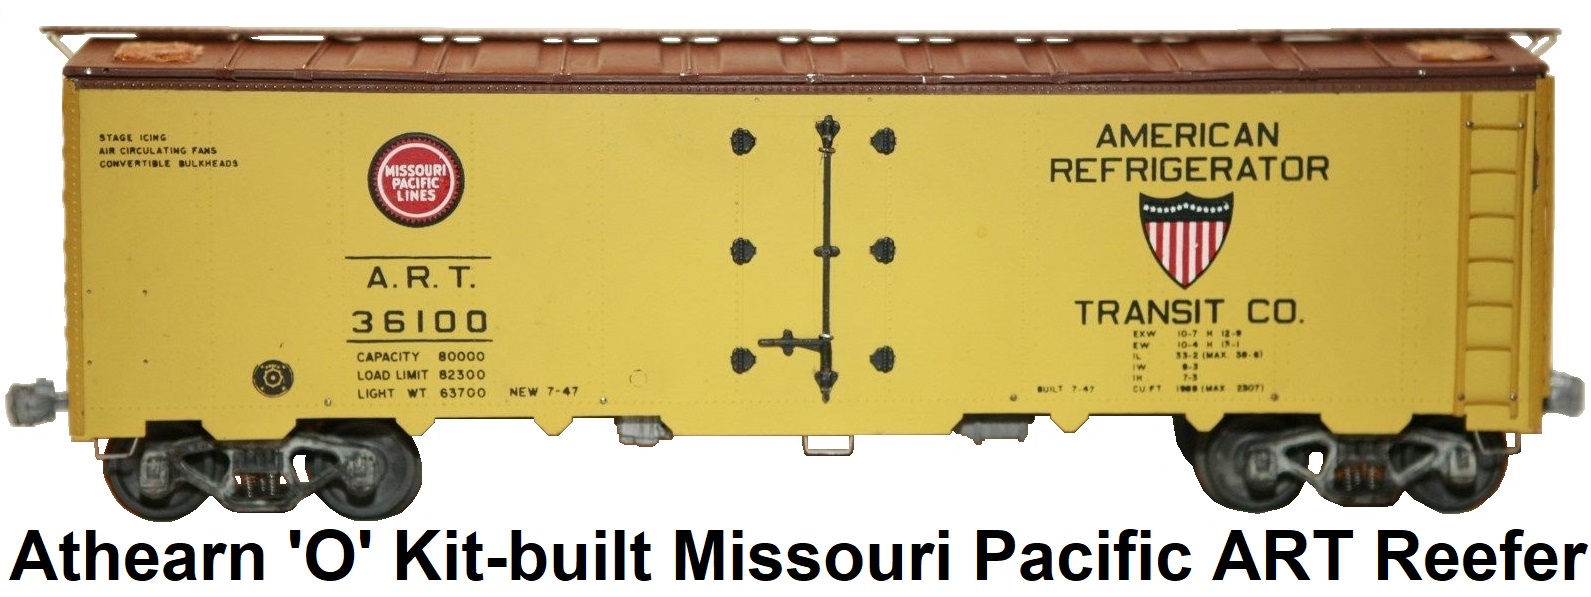 Athearn 'O' scale Kit-built 2-rail Missouri Pacific Lines American Refrigerator Transit Co. Reefer #36100